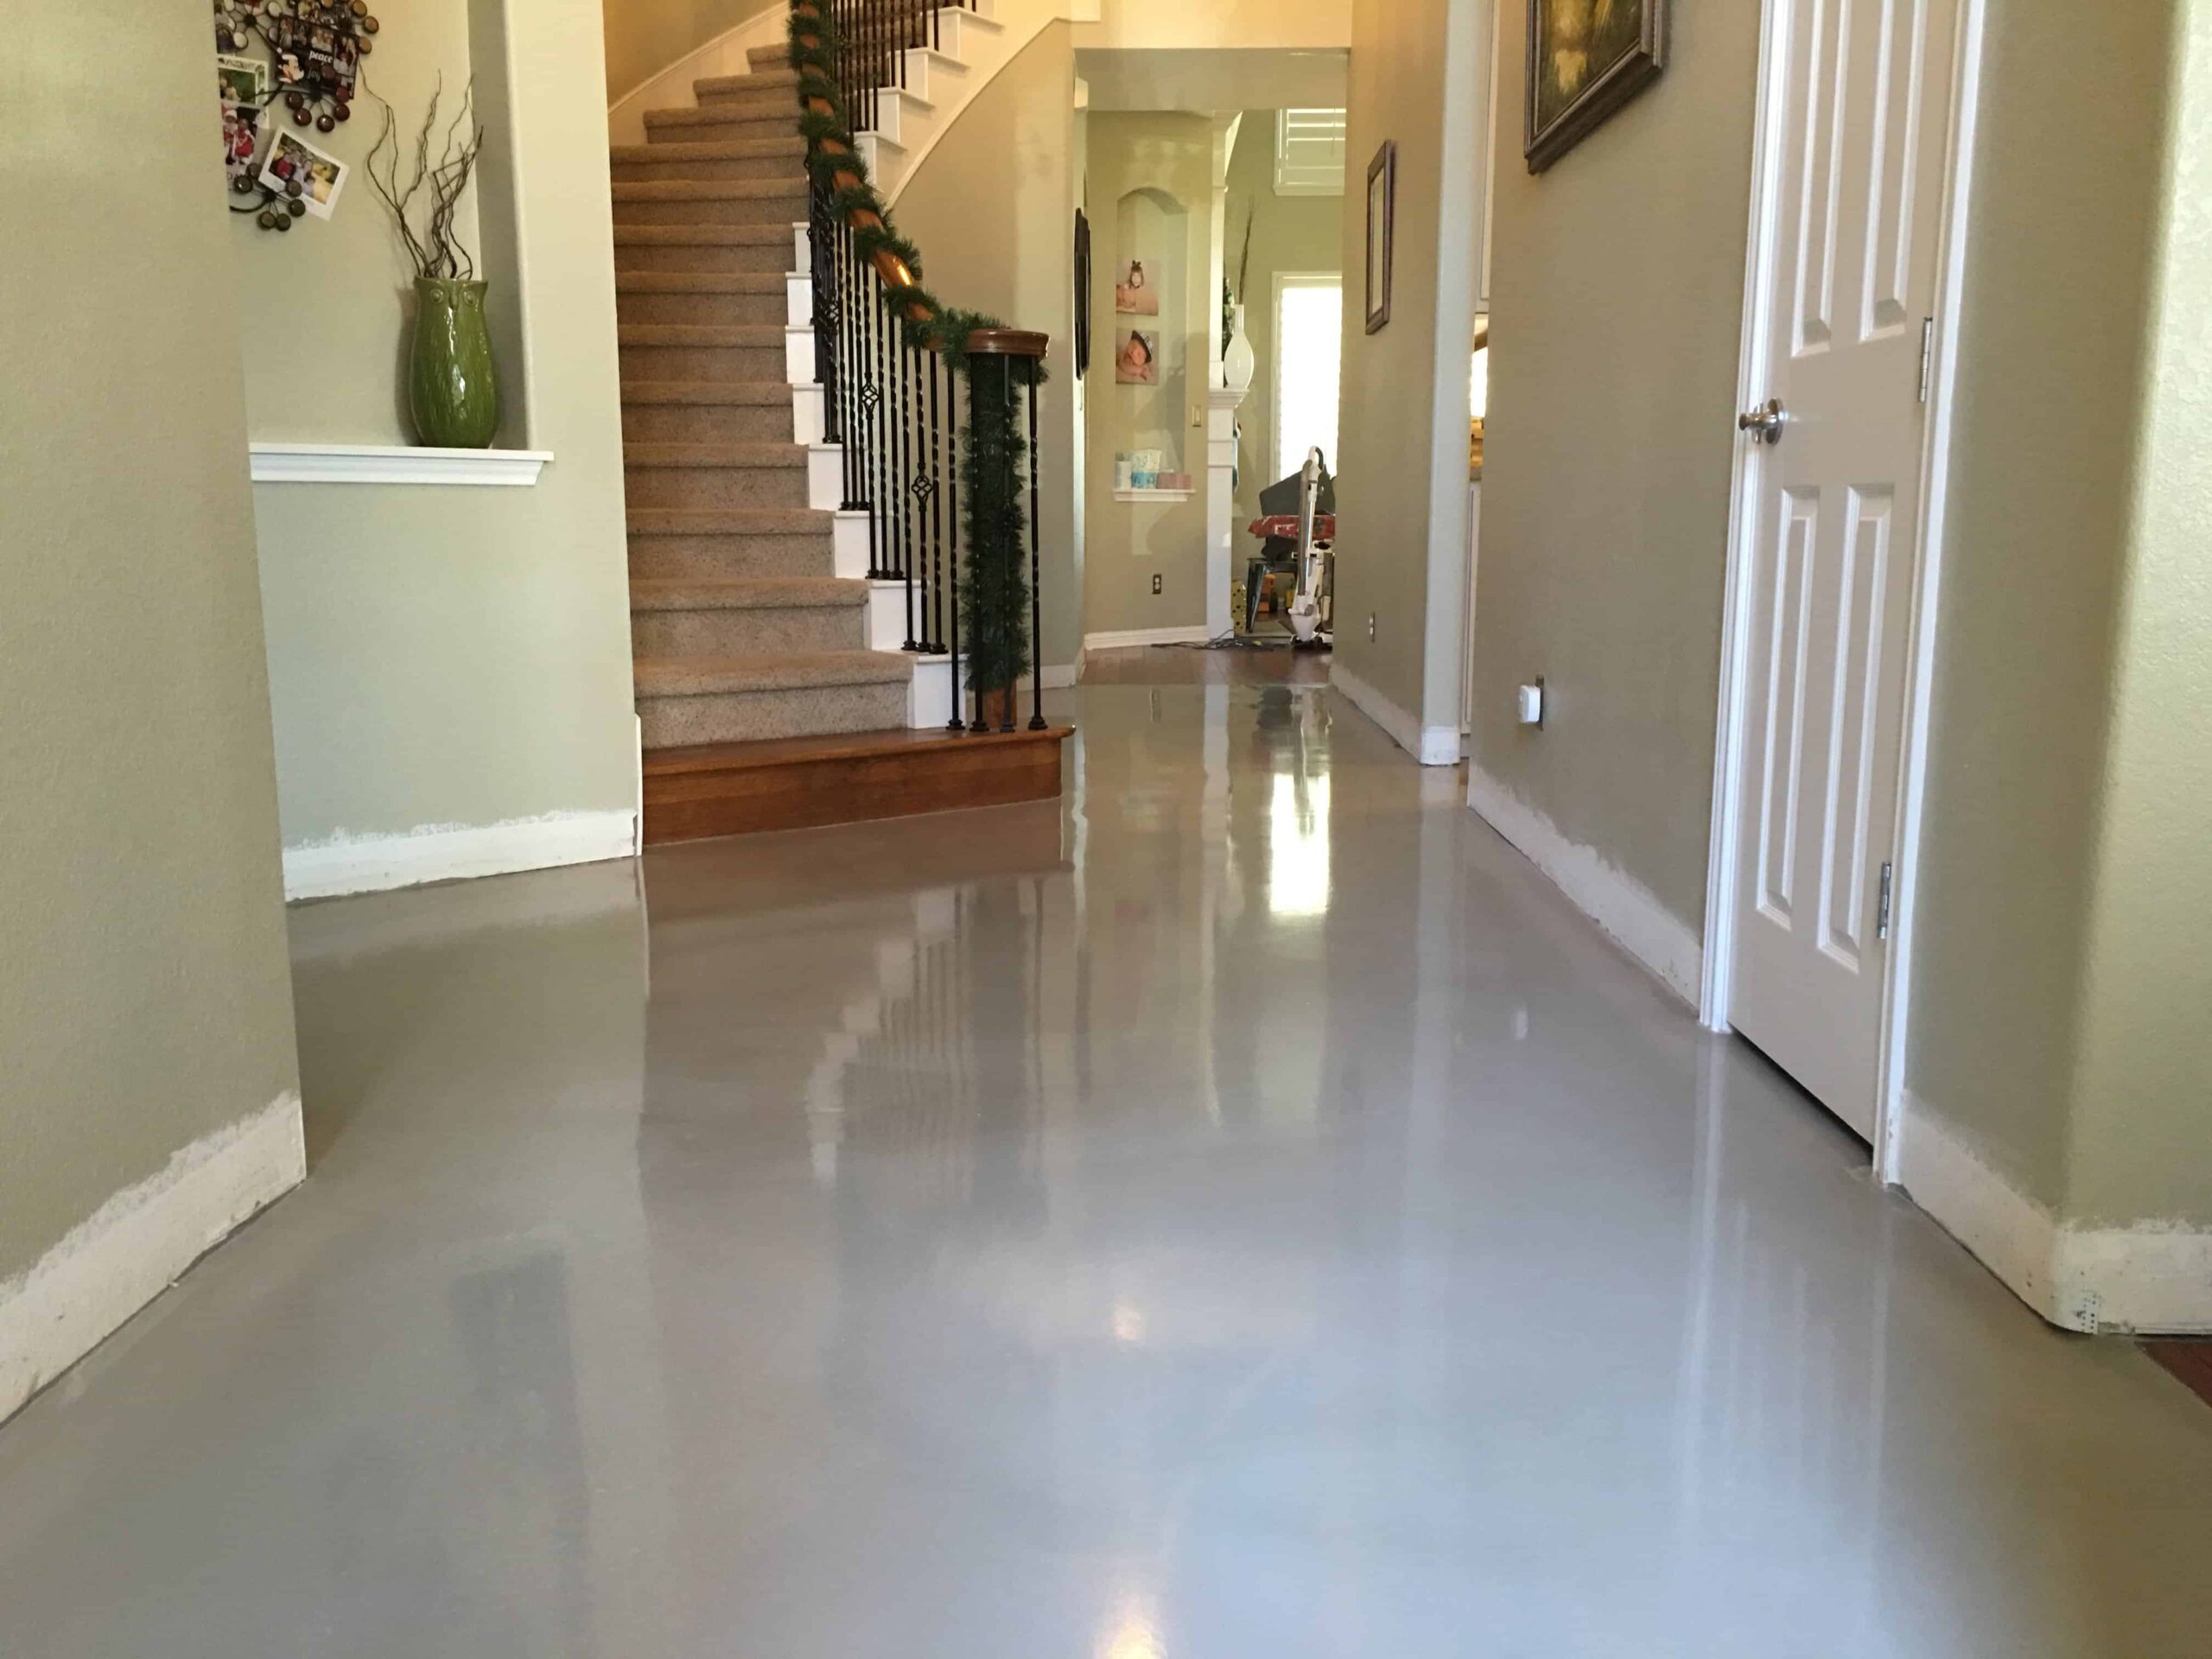 Shiny and glossy solid epoxy flooring in residential house. San antonio